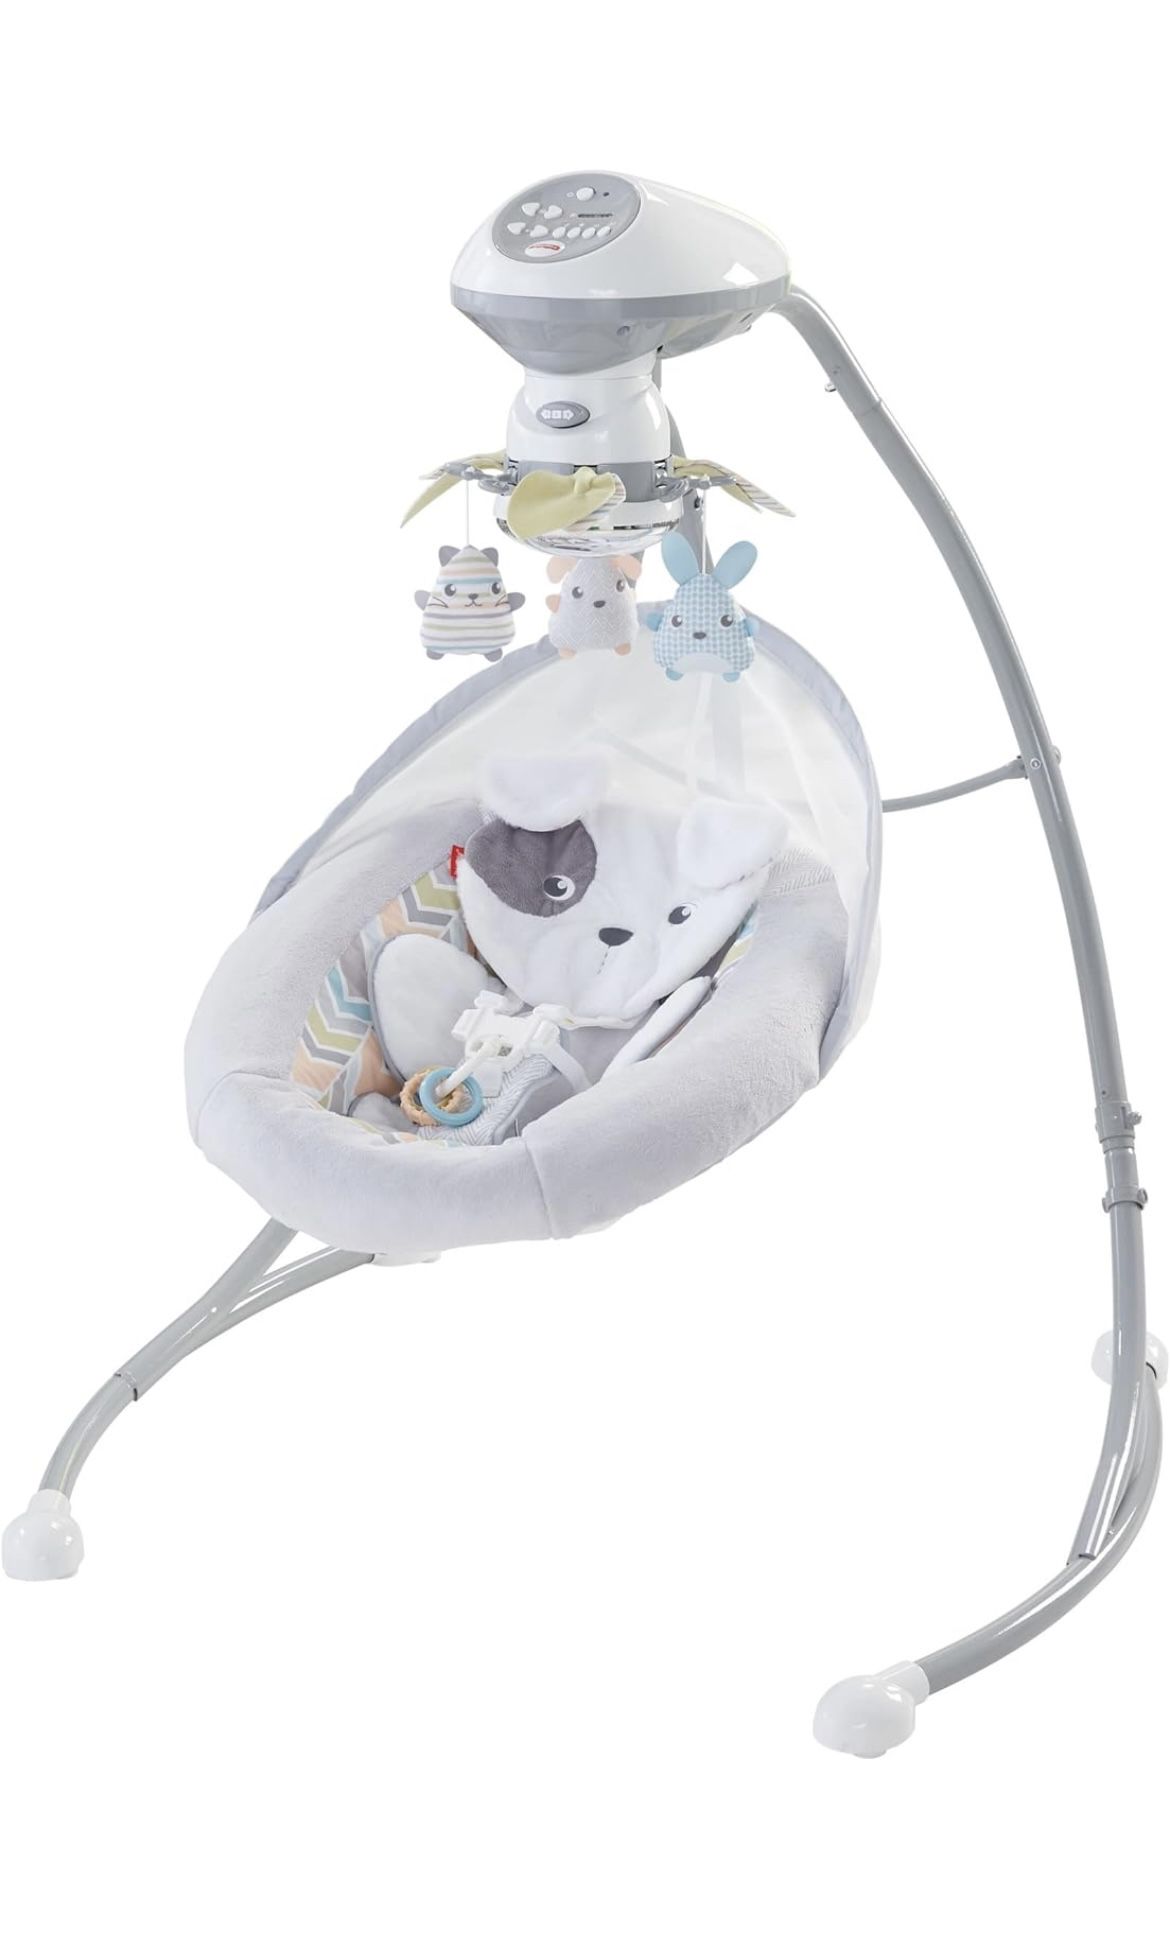 Fisher-Price Sweet Snugapuppy Swing, dual motion baby swingt with music, sounds and motorized mobile